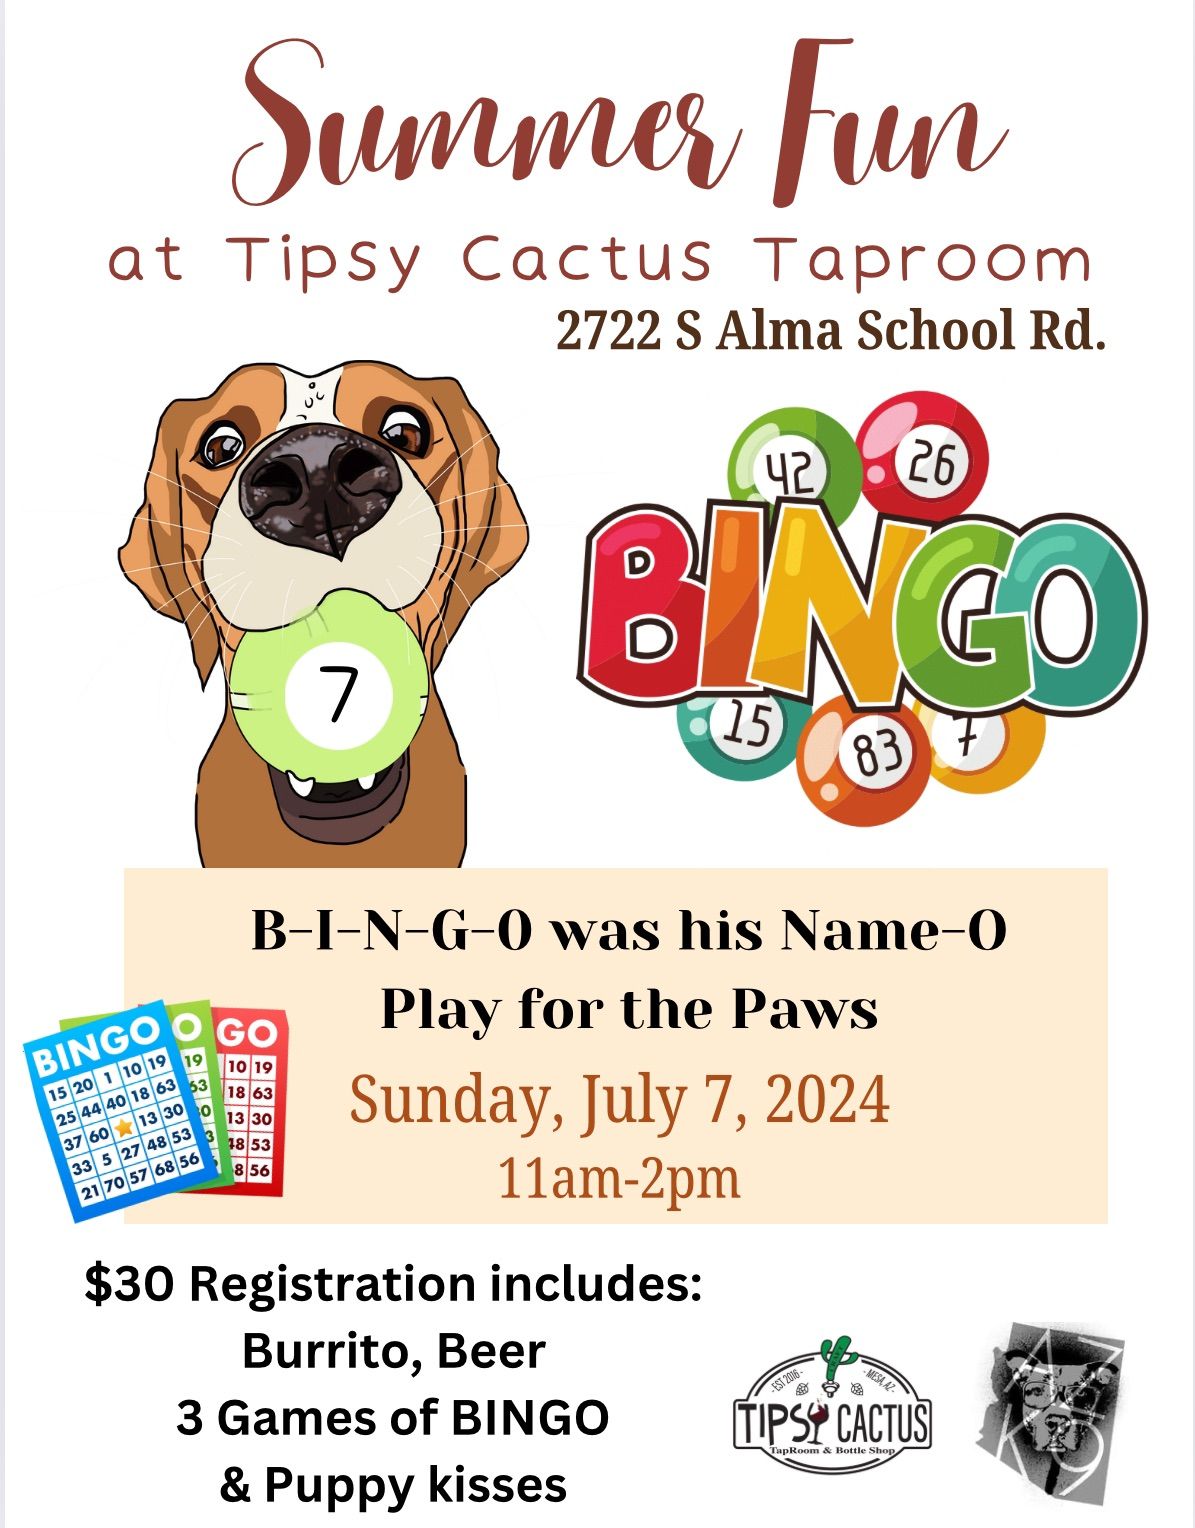 Summer fun at Tipsy Cactus: BINGO for the Paws